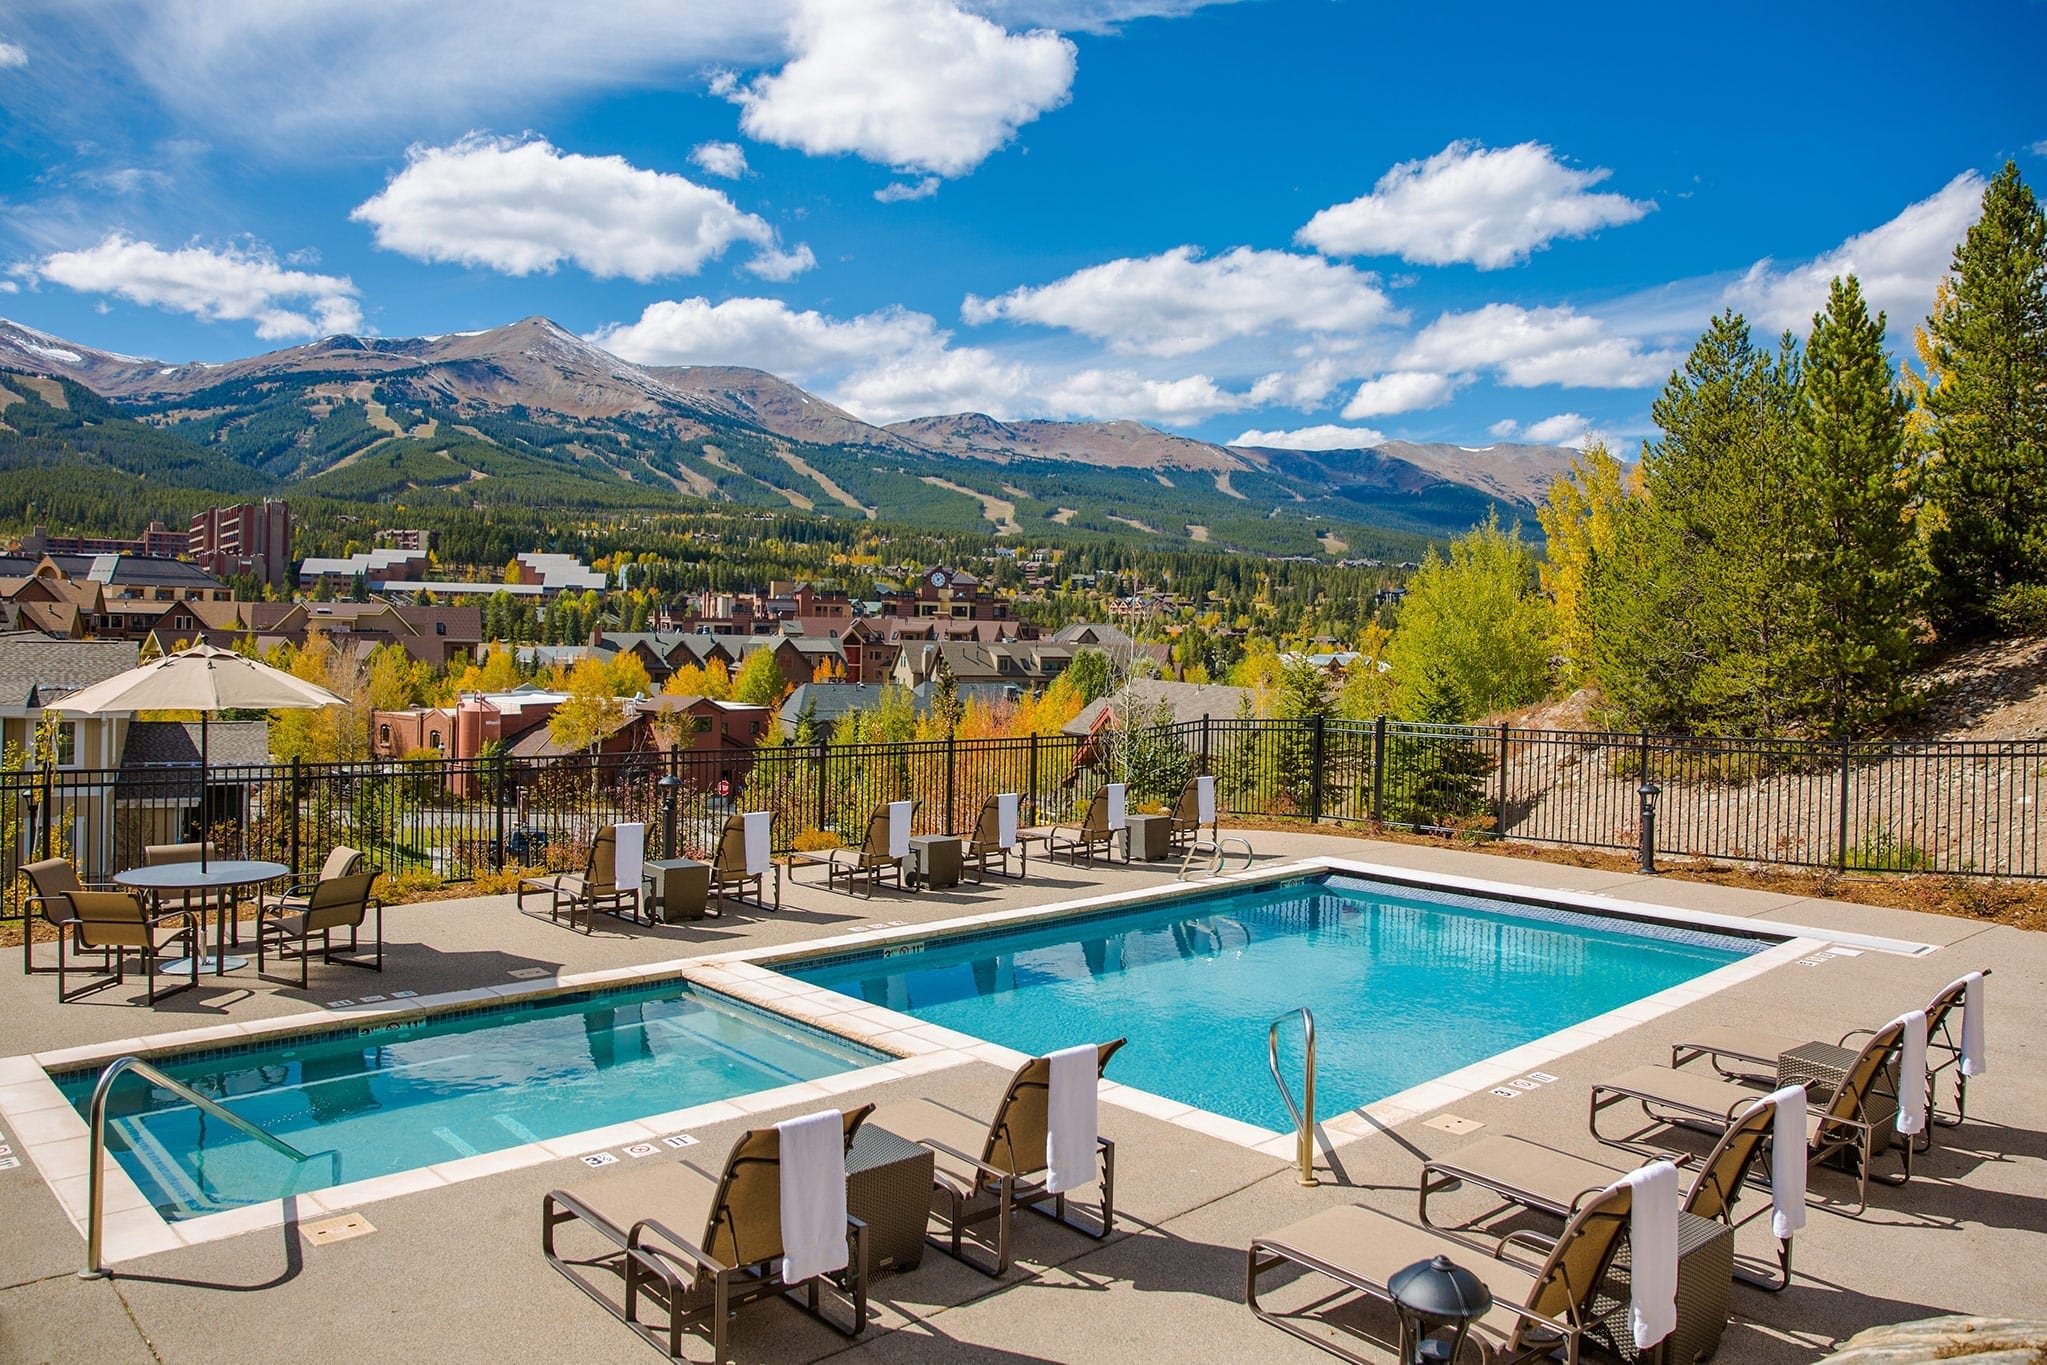 The Residence Inn pool area with one of the best views in Breckenridge.